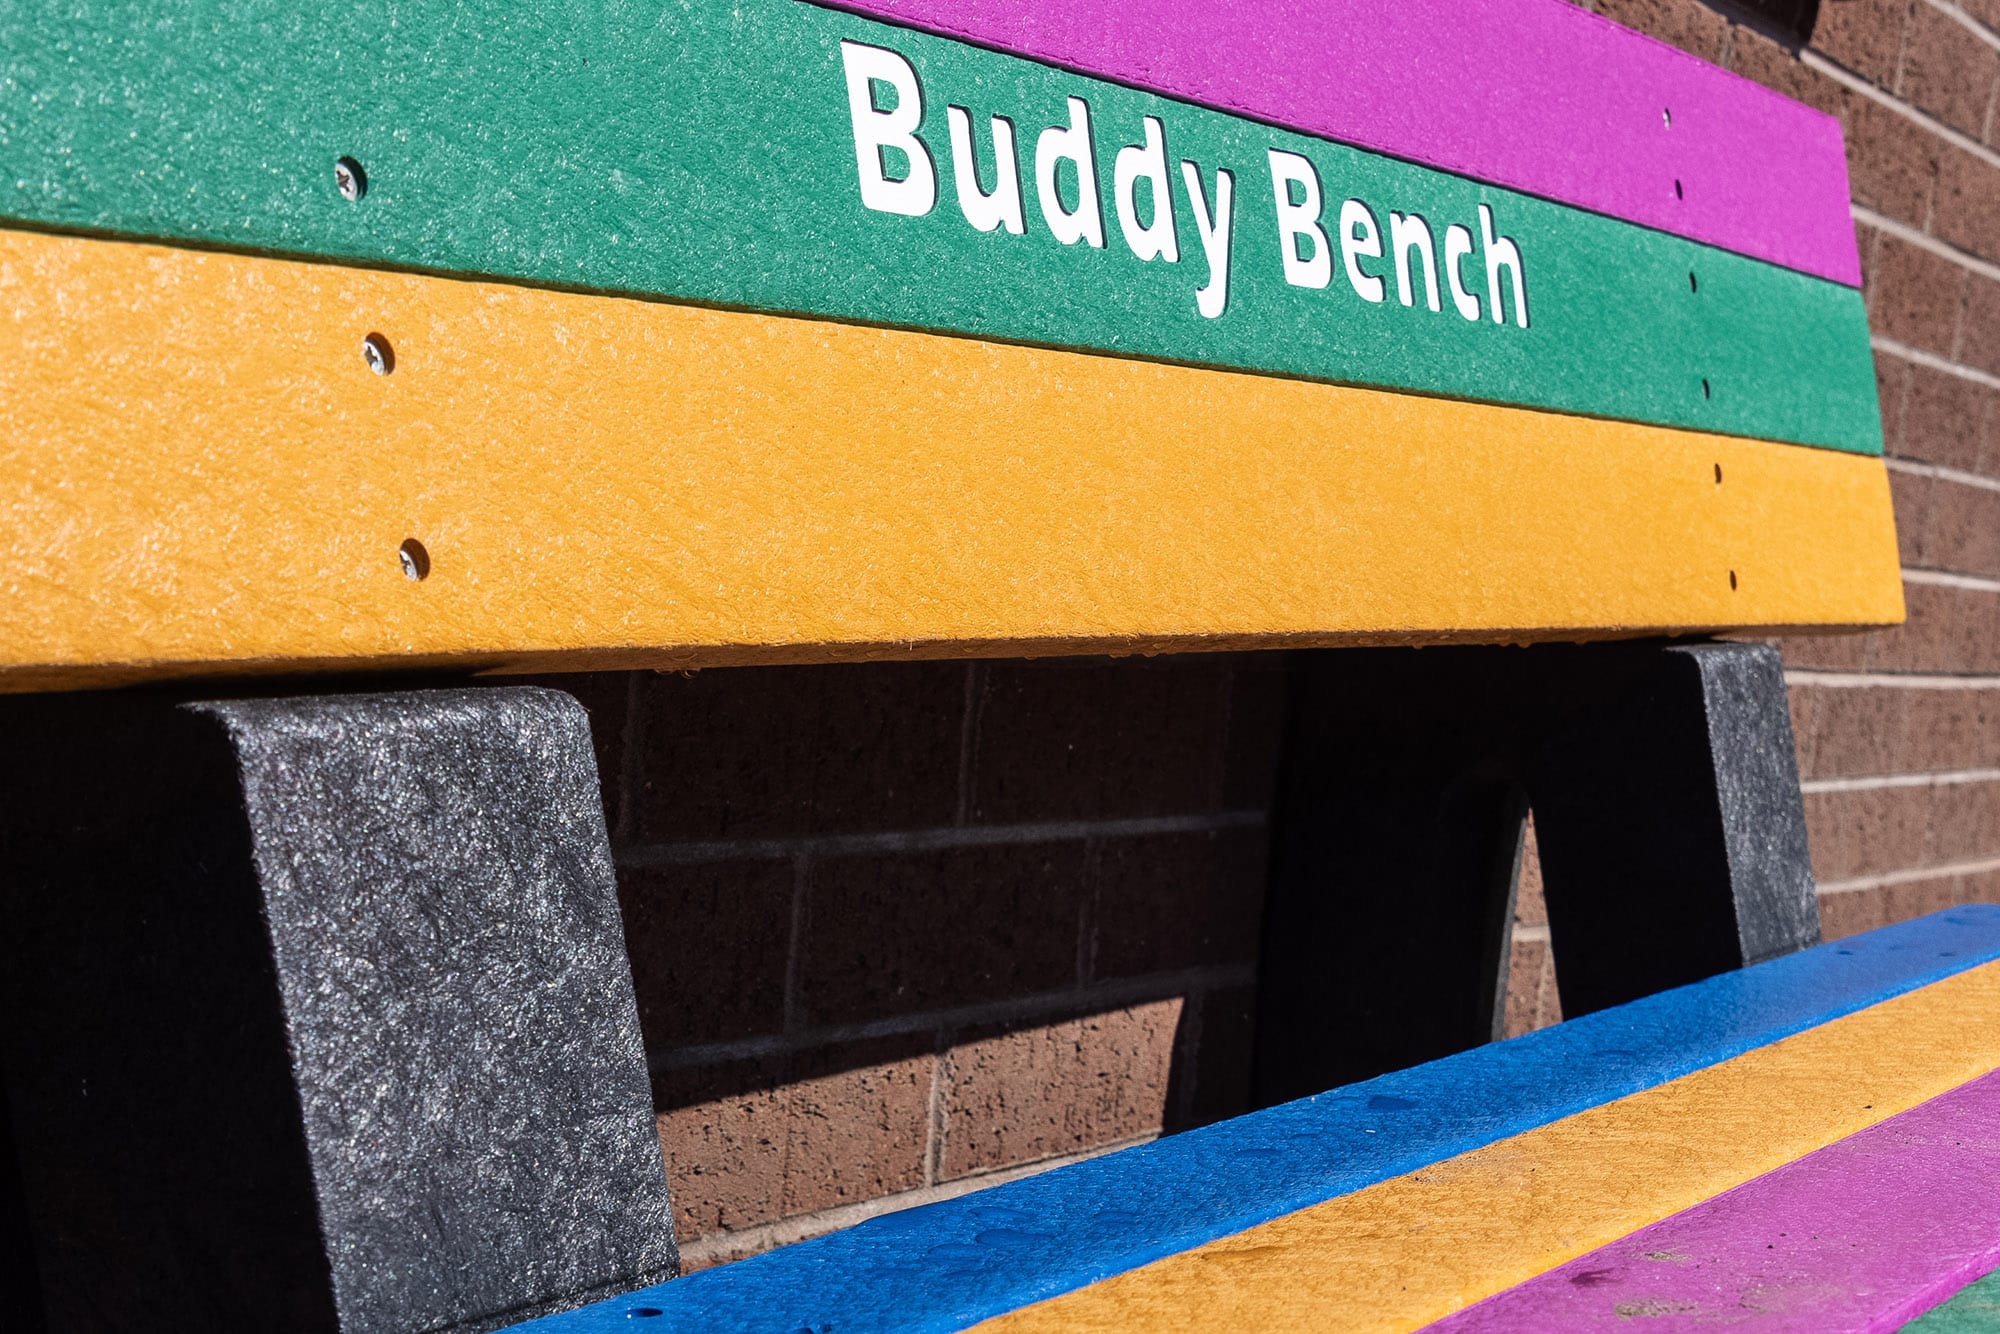 The recycled plastic Buddy Bench is very poplar with schools to help combat isolation and loneliness.